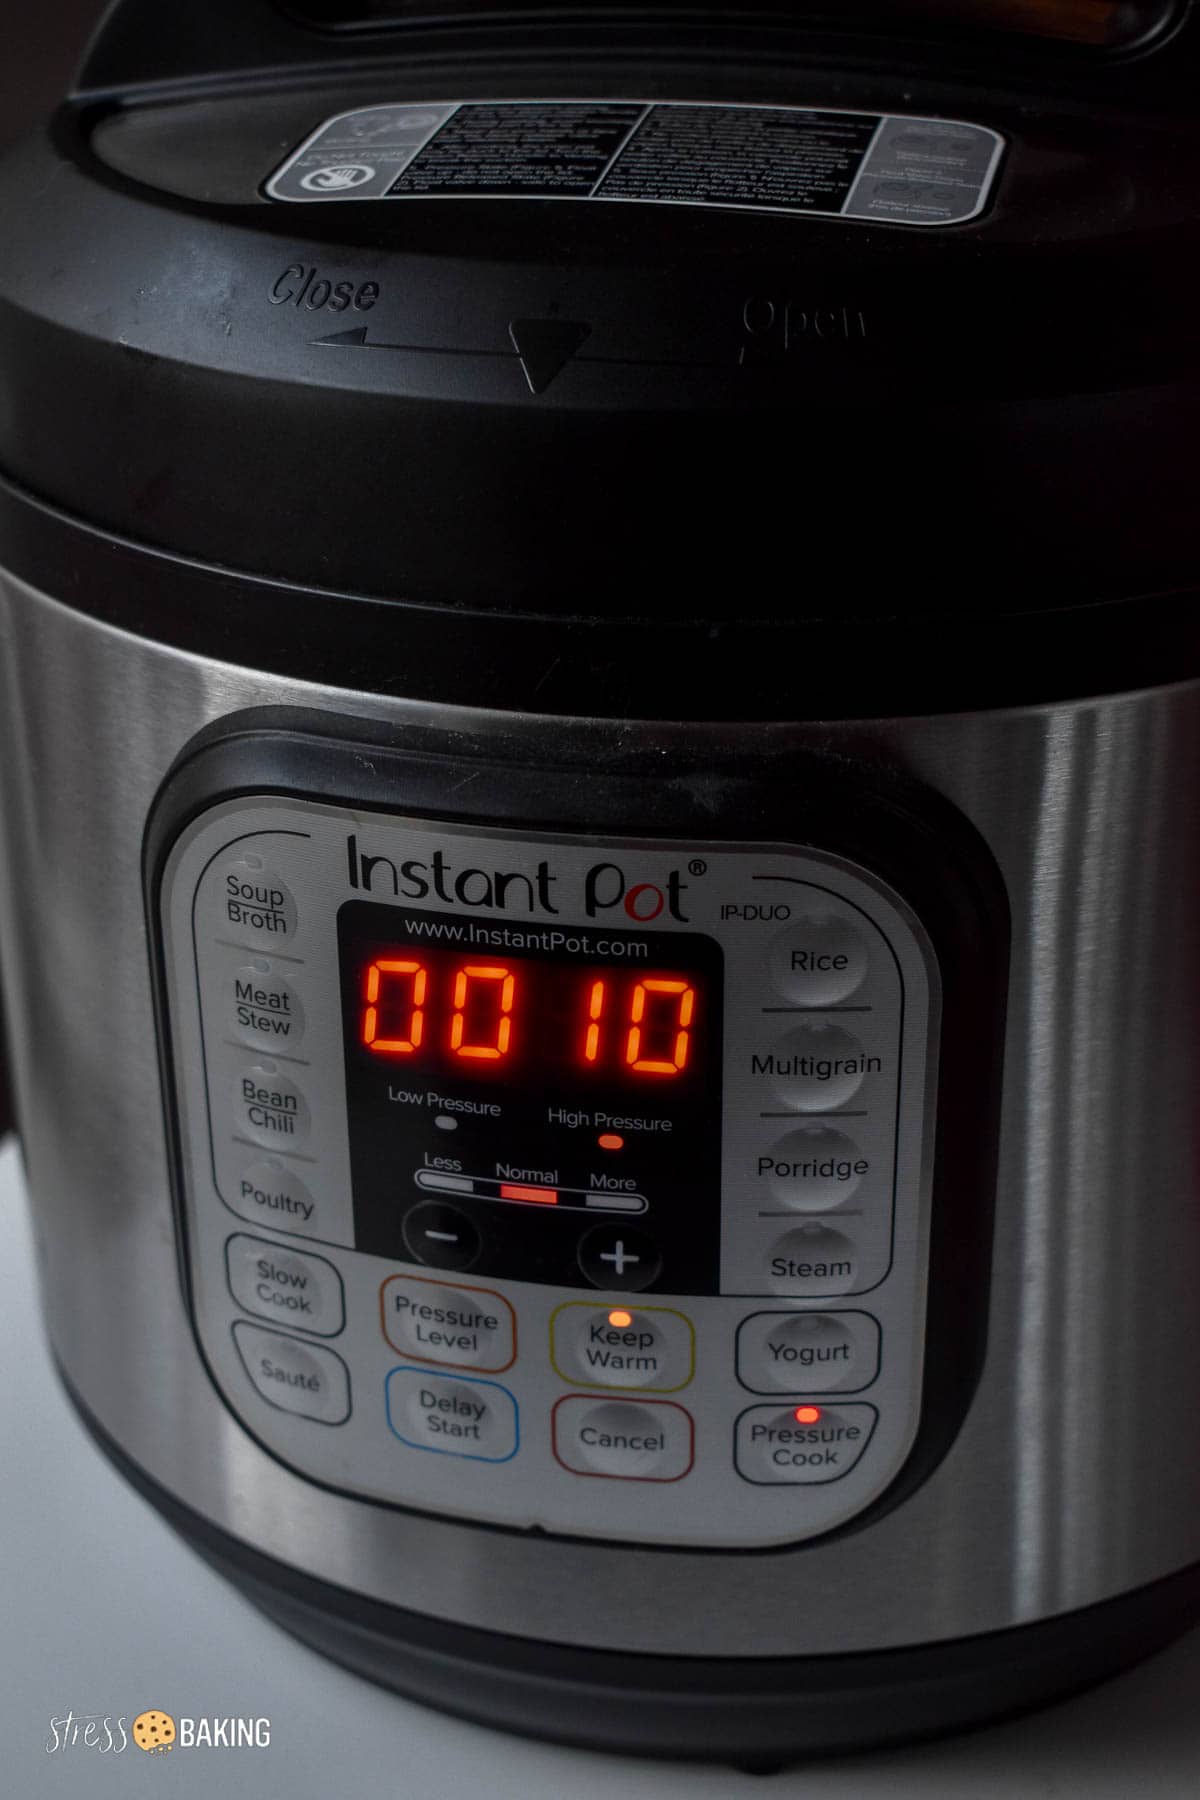 An Instant Pot timer set to 10 minutes